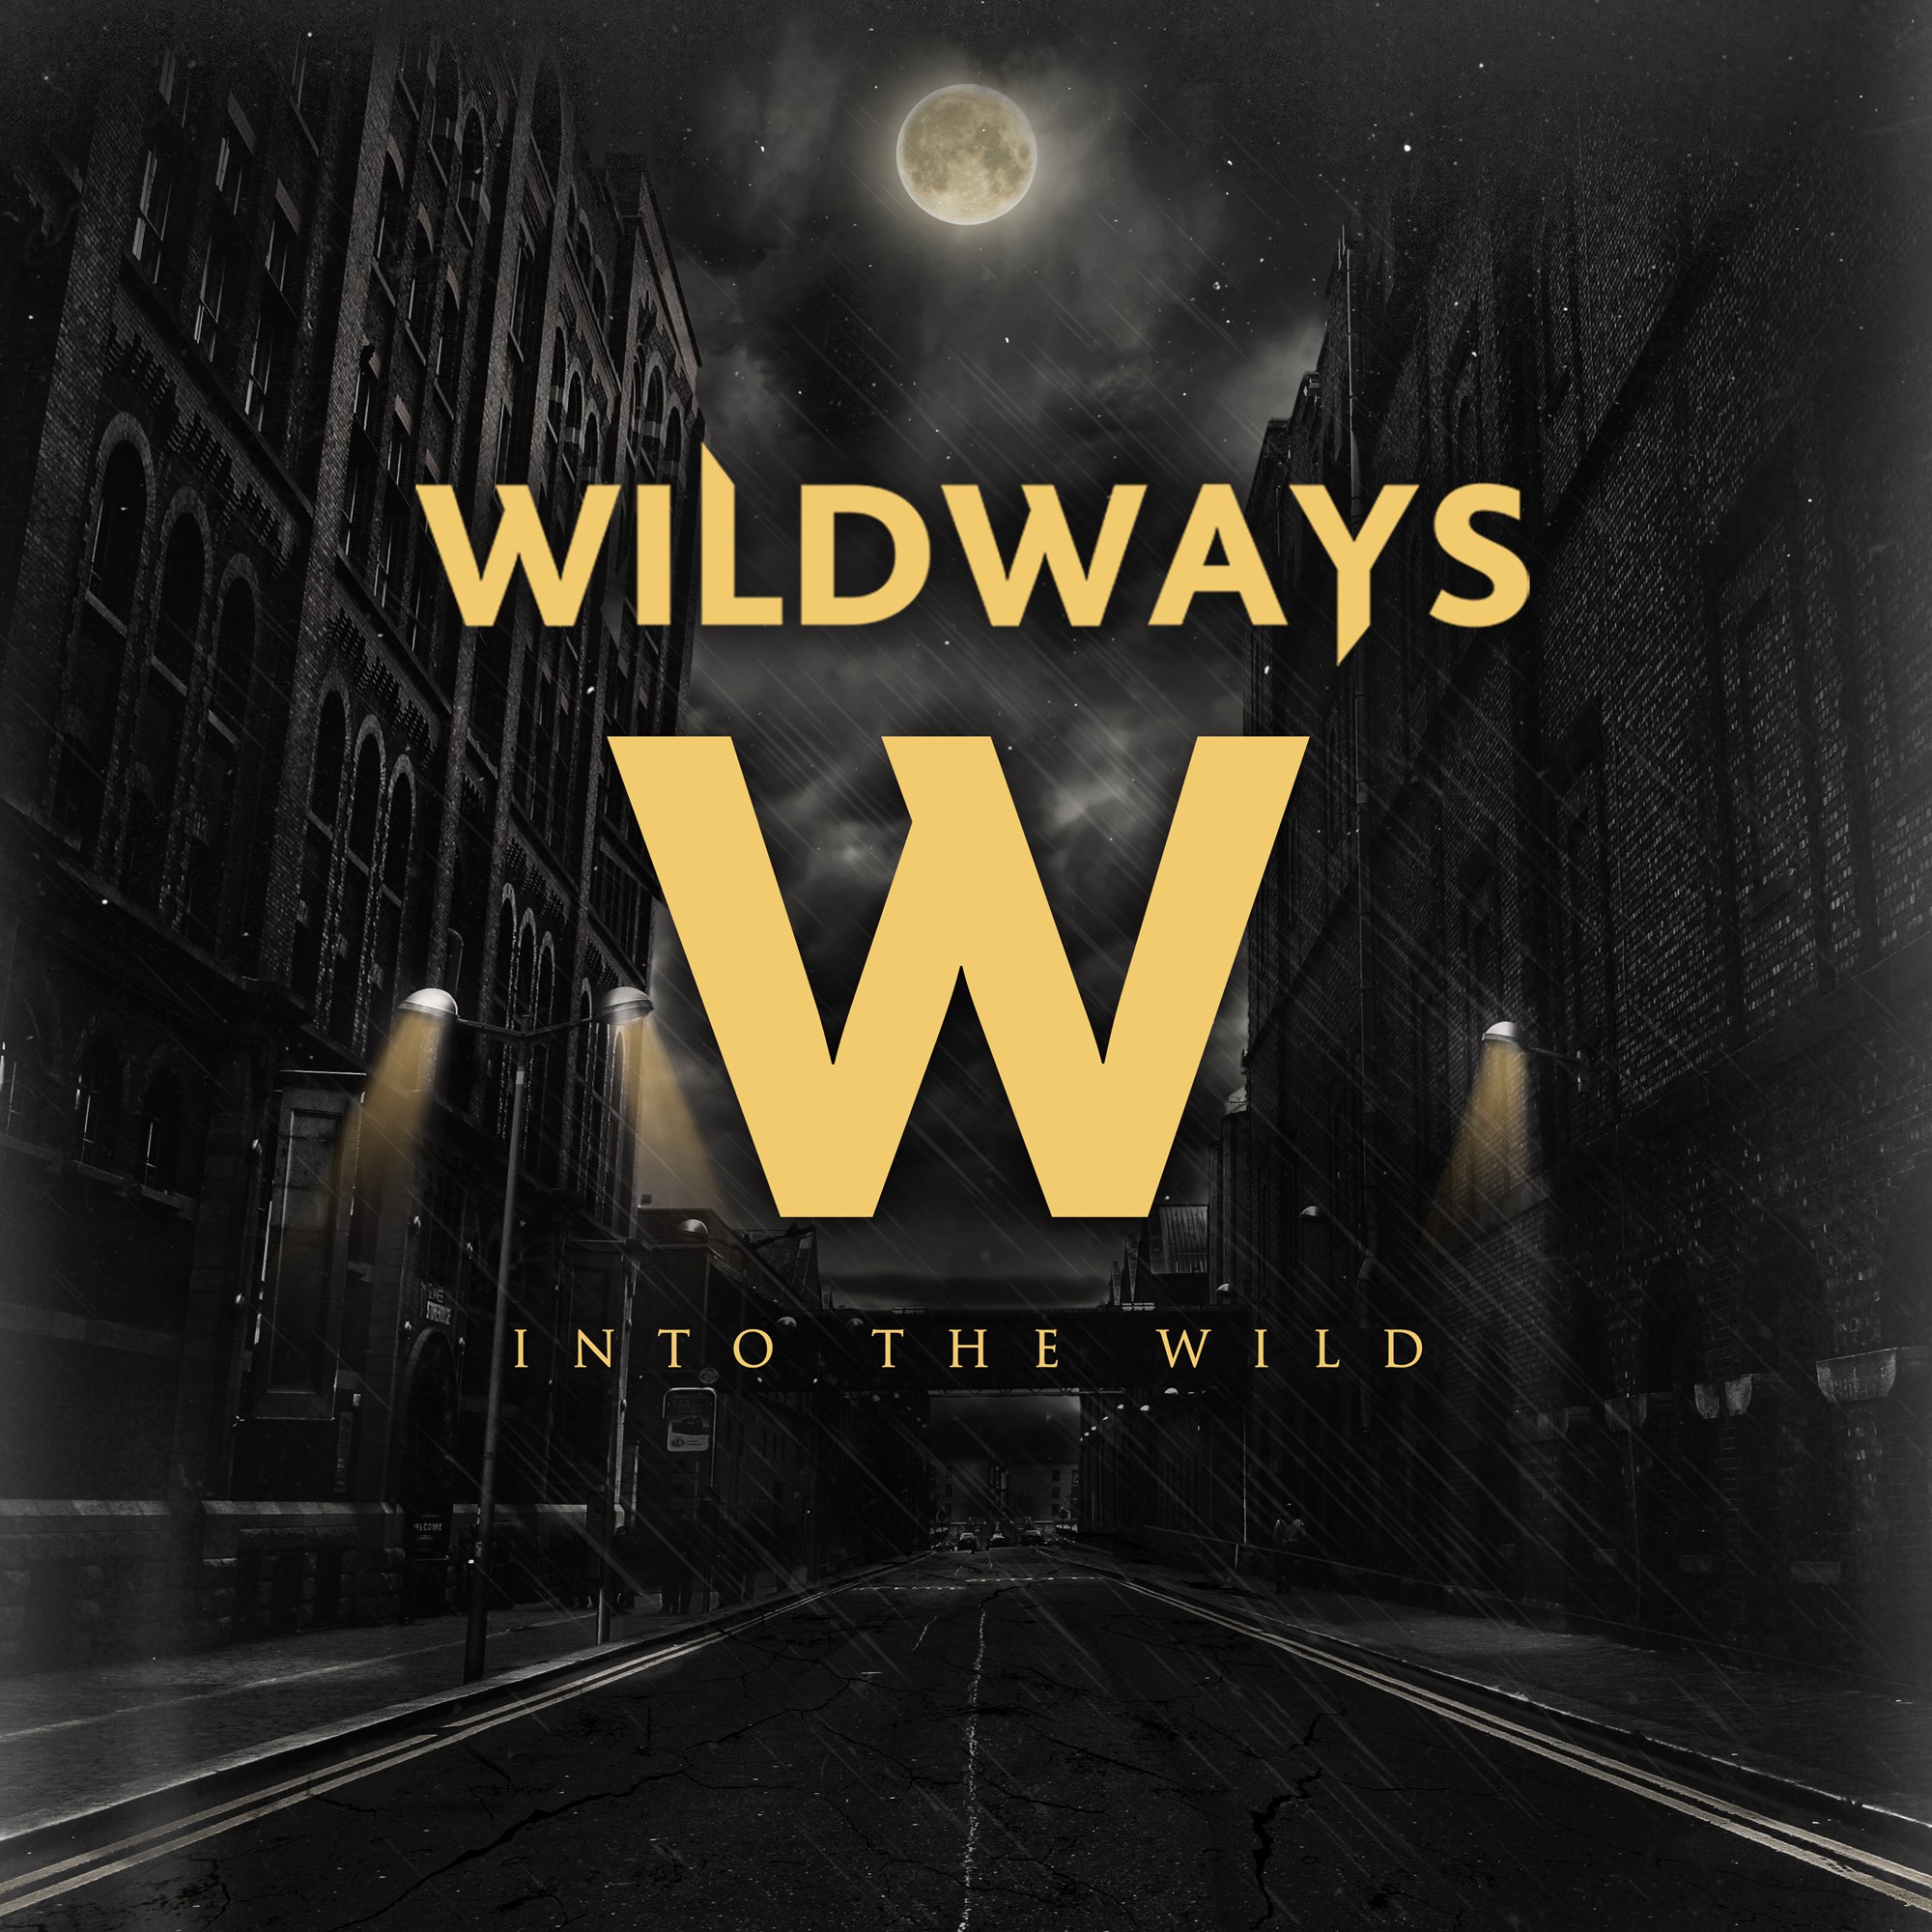 Interview with Toli from Wildways